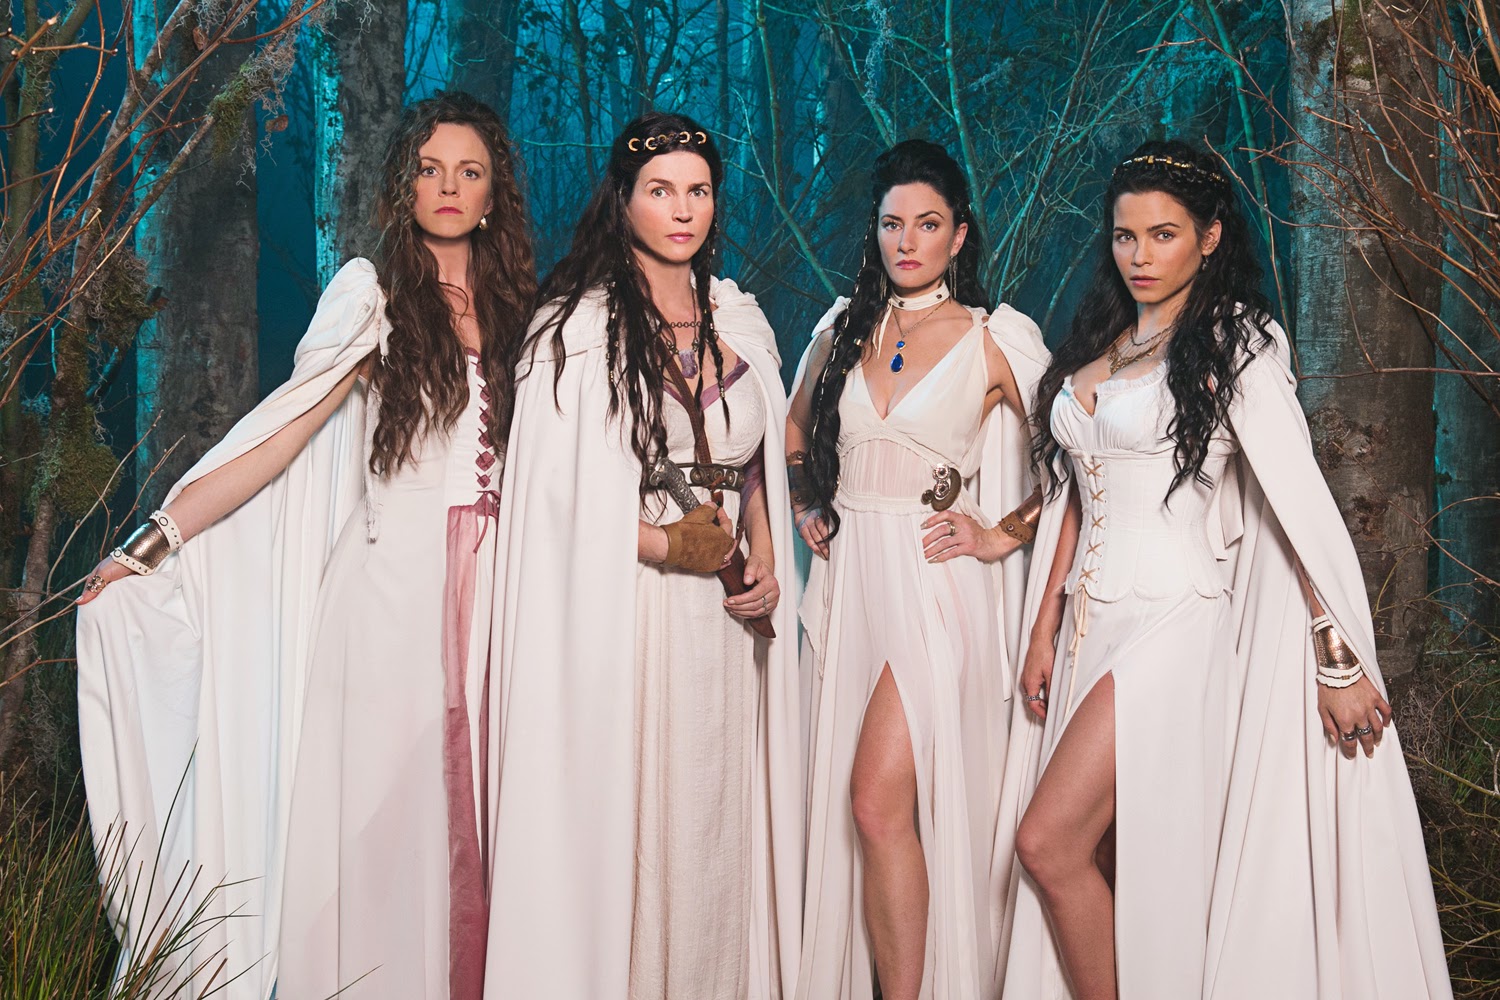 Download Witches Of East End Season 2 torrents Bitsnoop